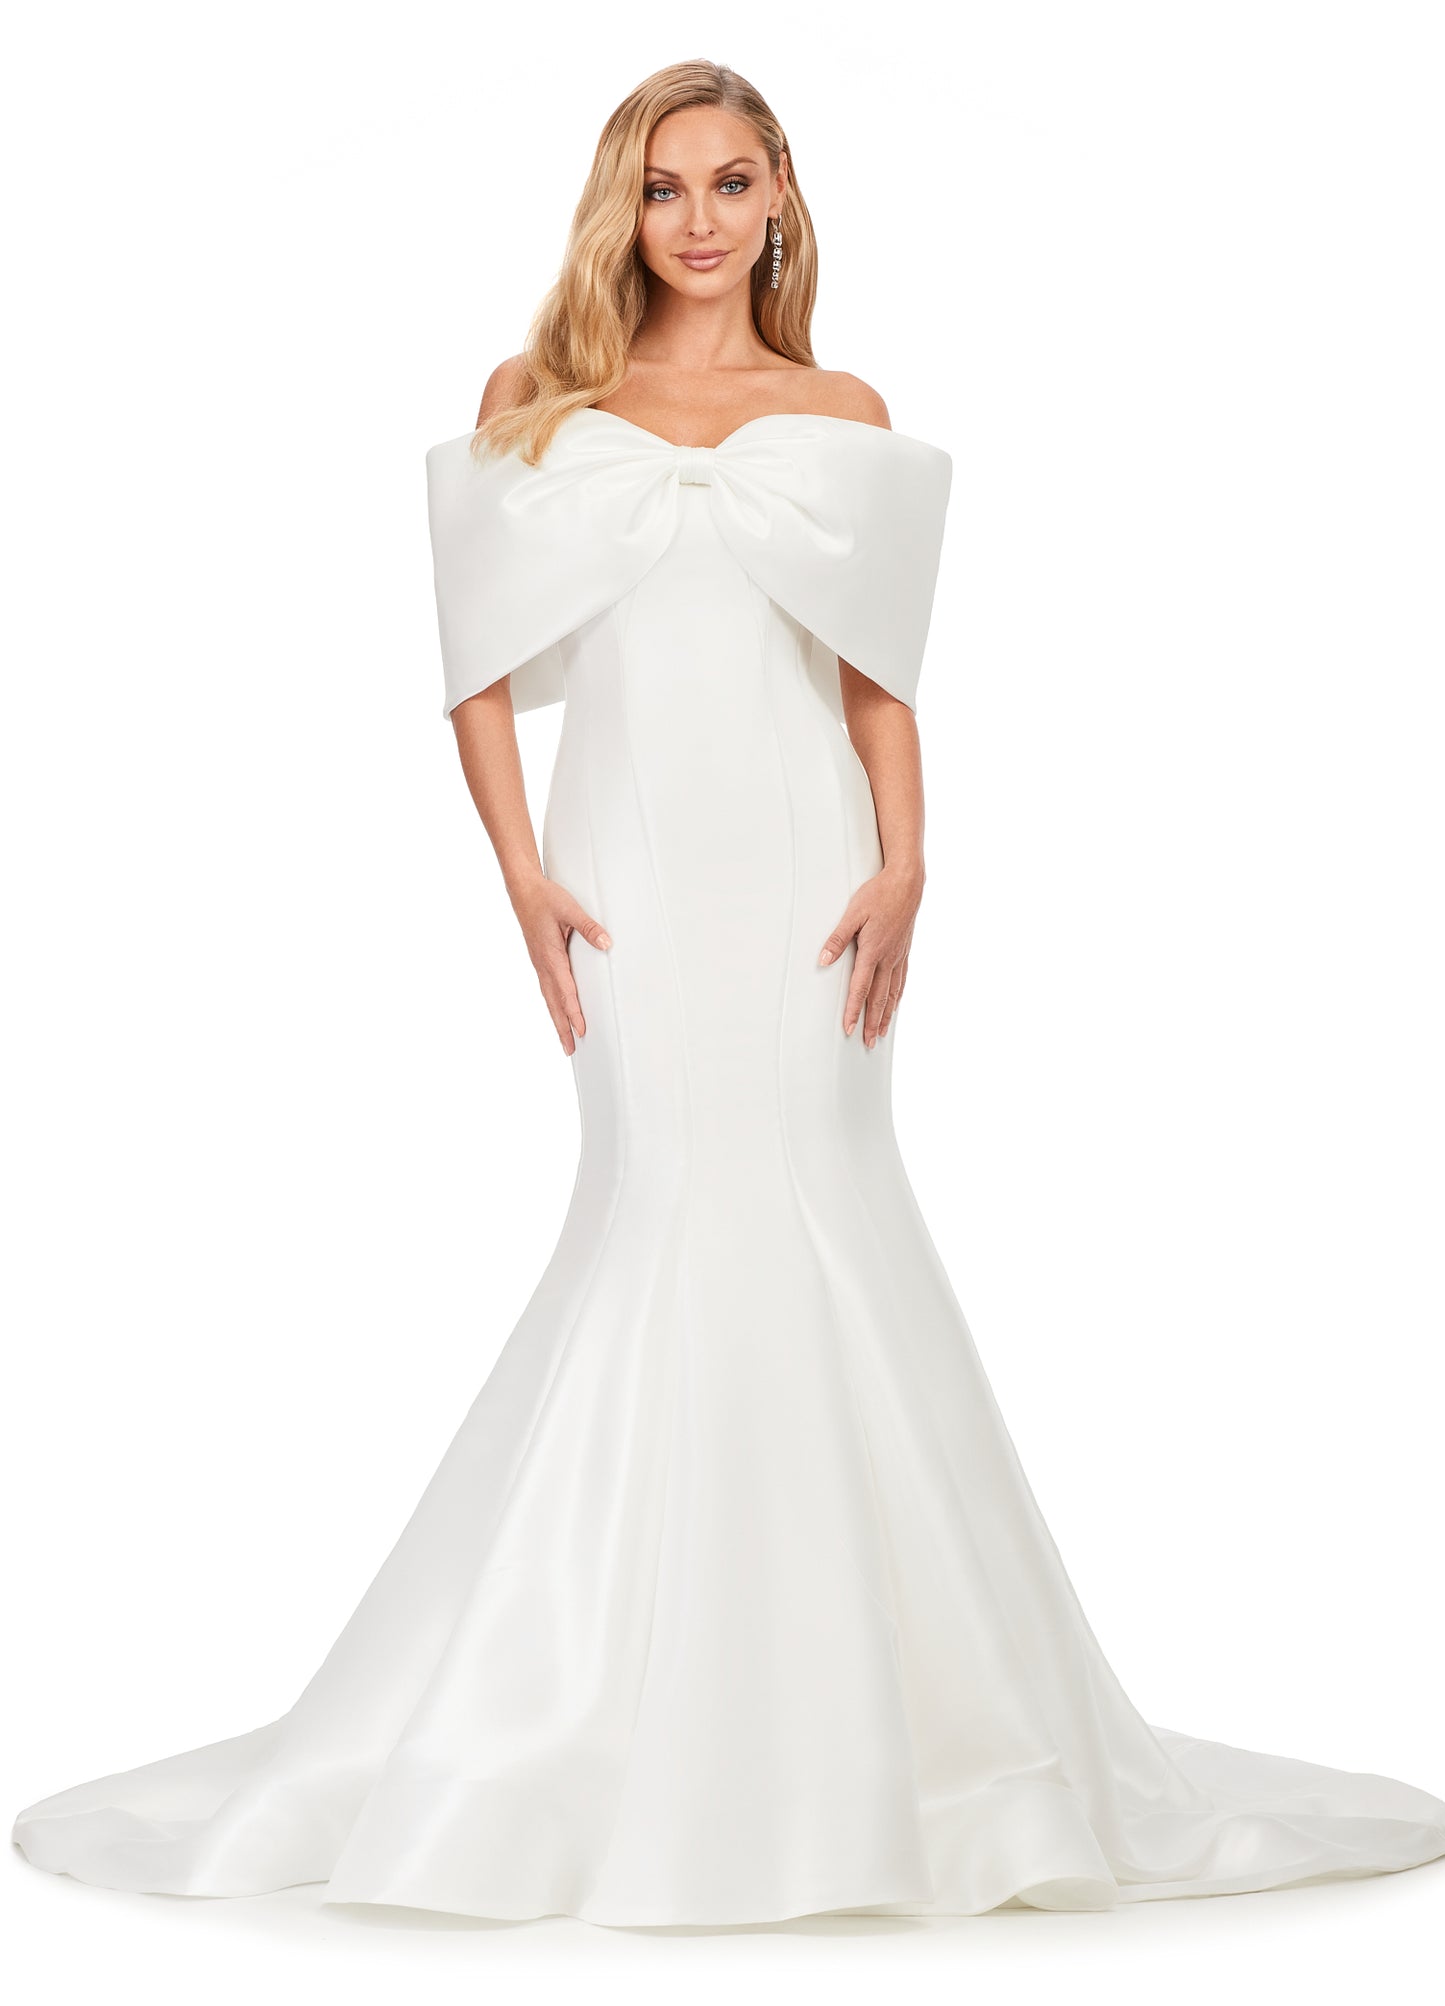 Ashley Lauren 11380 Off The Shoulder Phantom Satin Oversized Bow Long Train Gown Formal Dress. An elegant gown fit for any occasion. The dramatic oversized bow wraps around creating an off shoulder silhouette. The back seam is adorned with buttons.